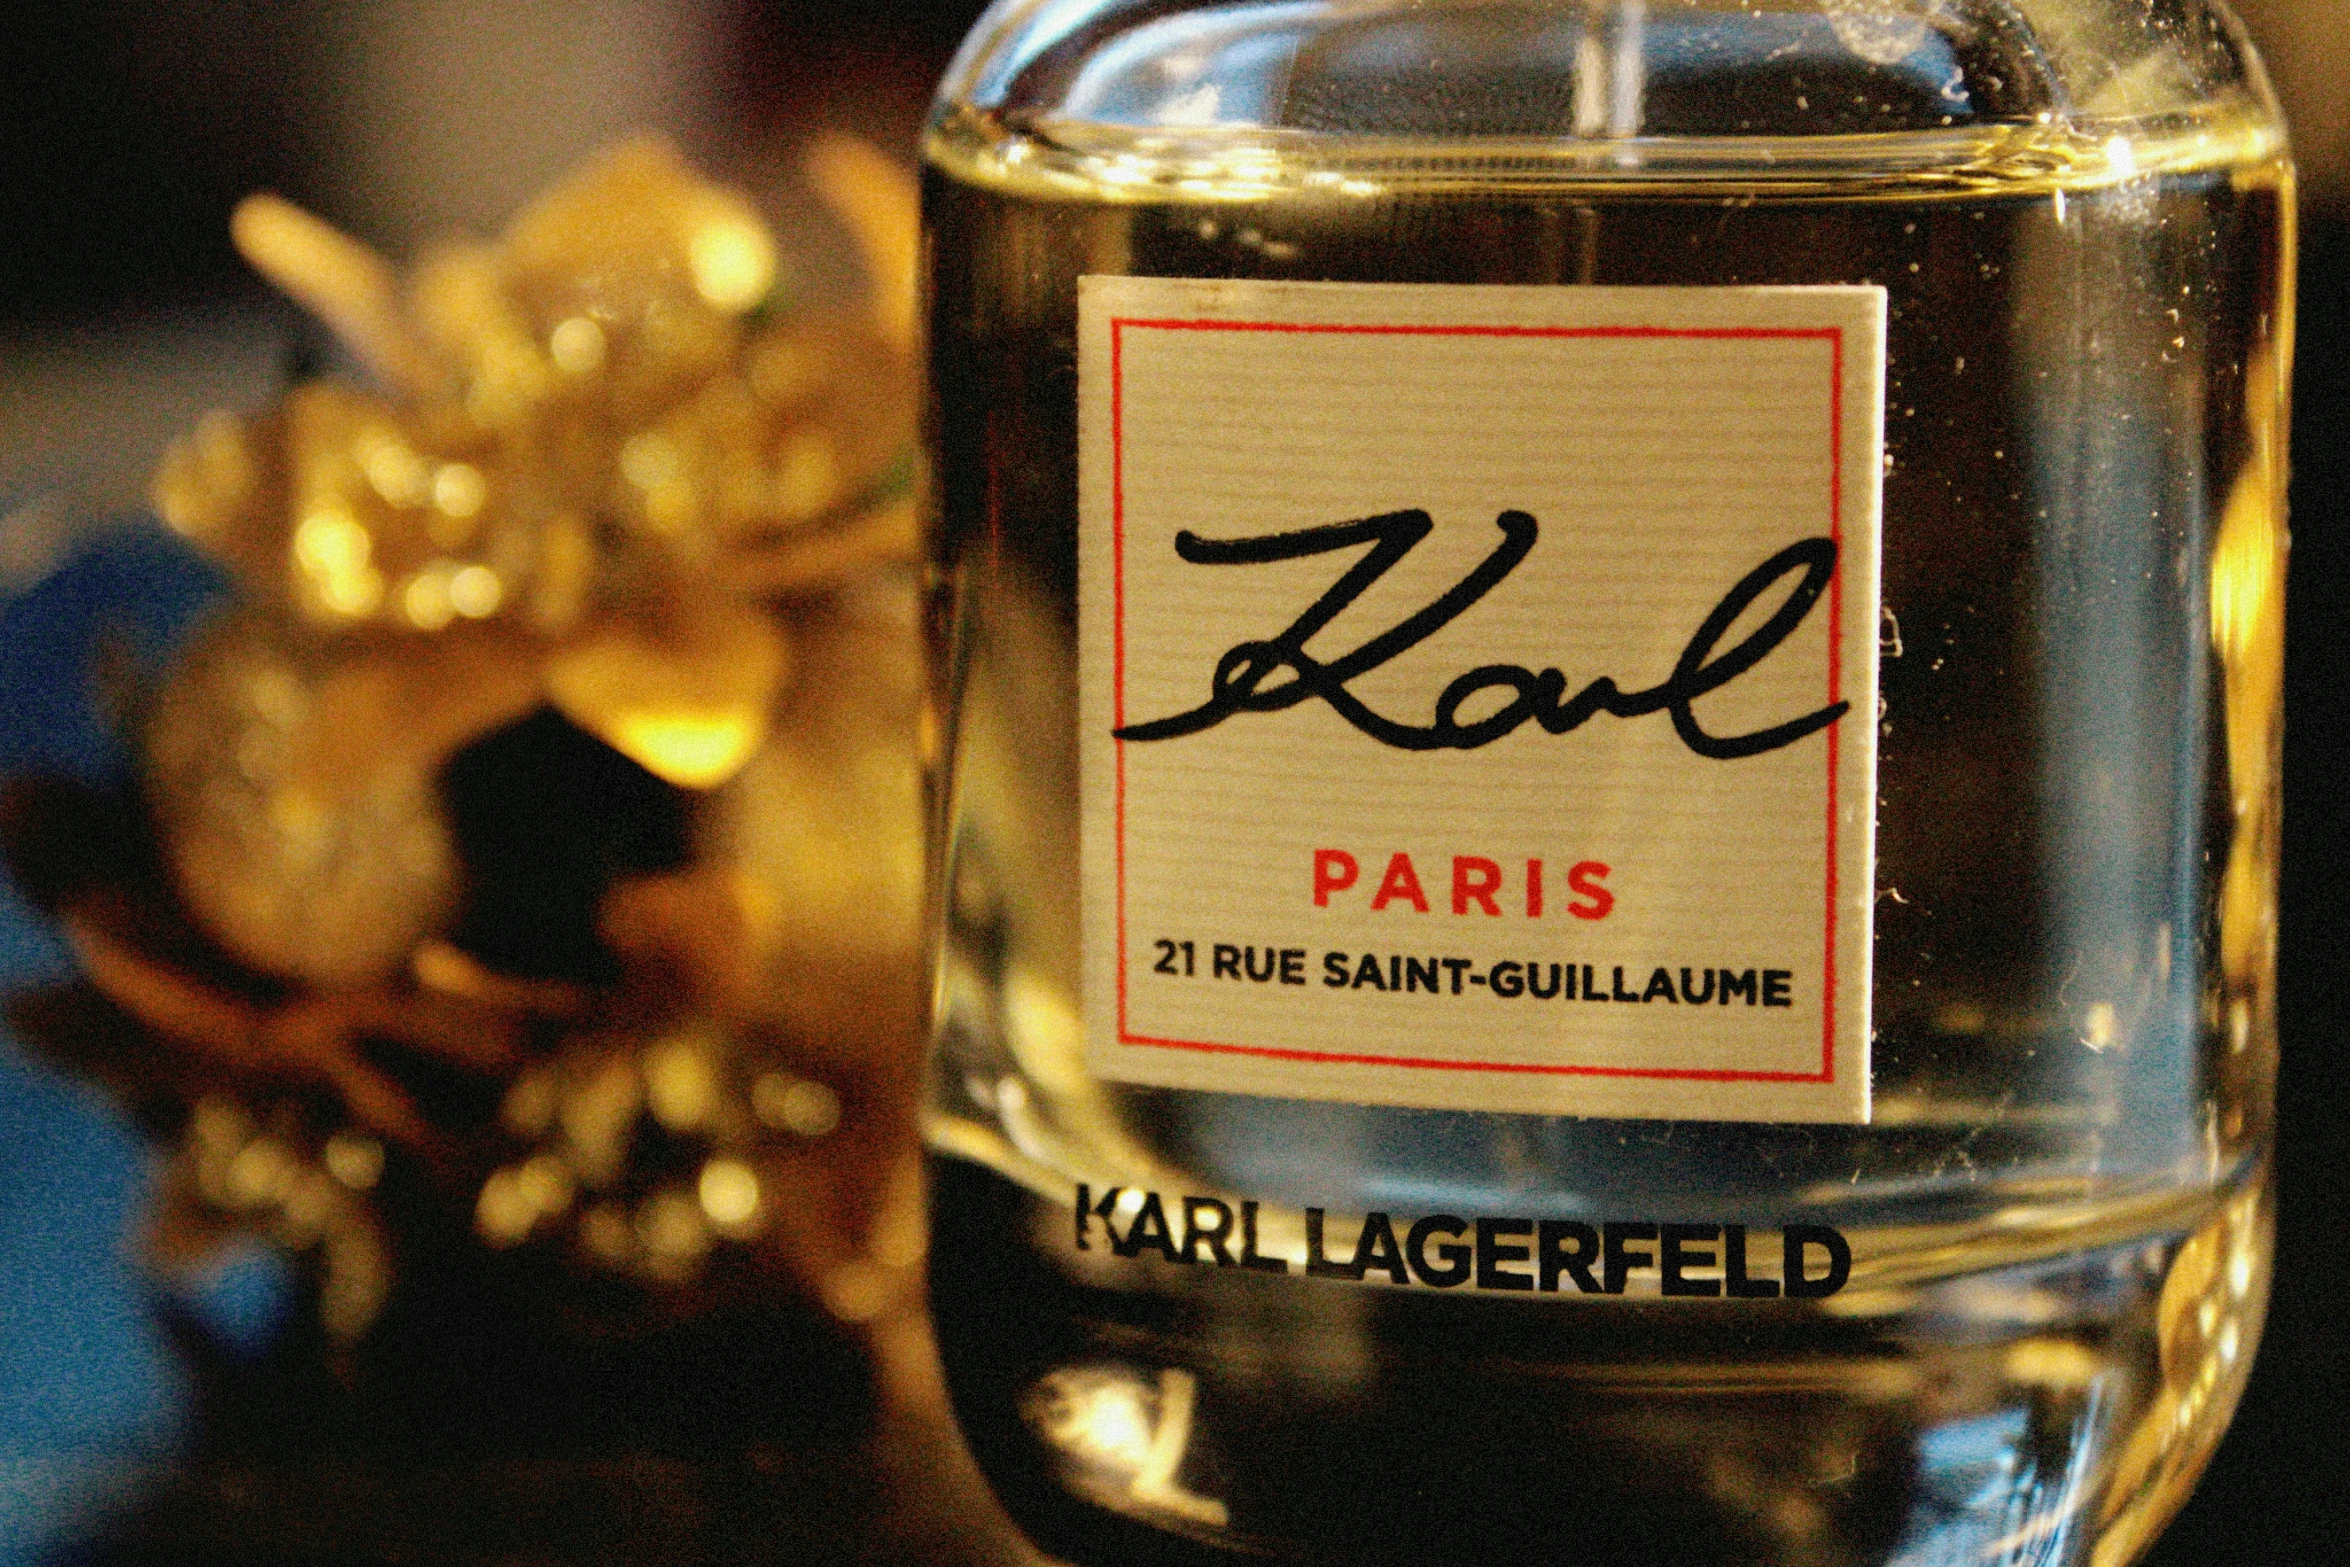 the label on a glass bottle with gold flower decorations in the background